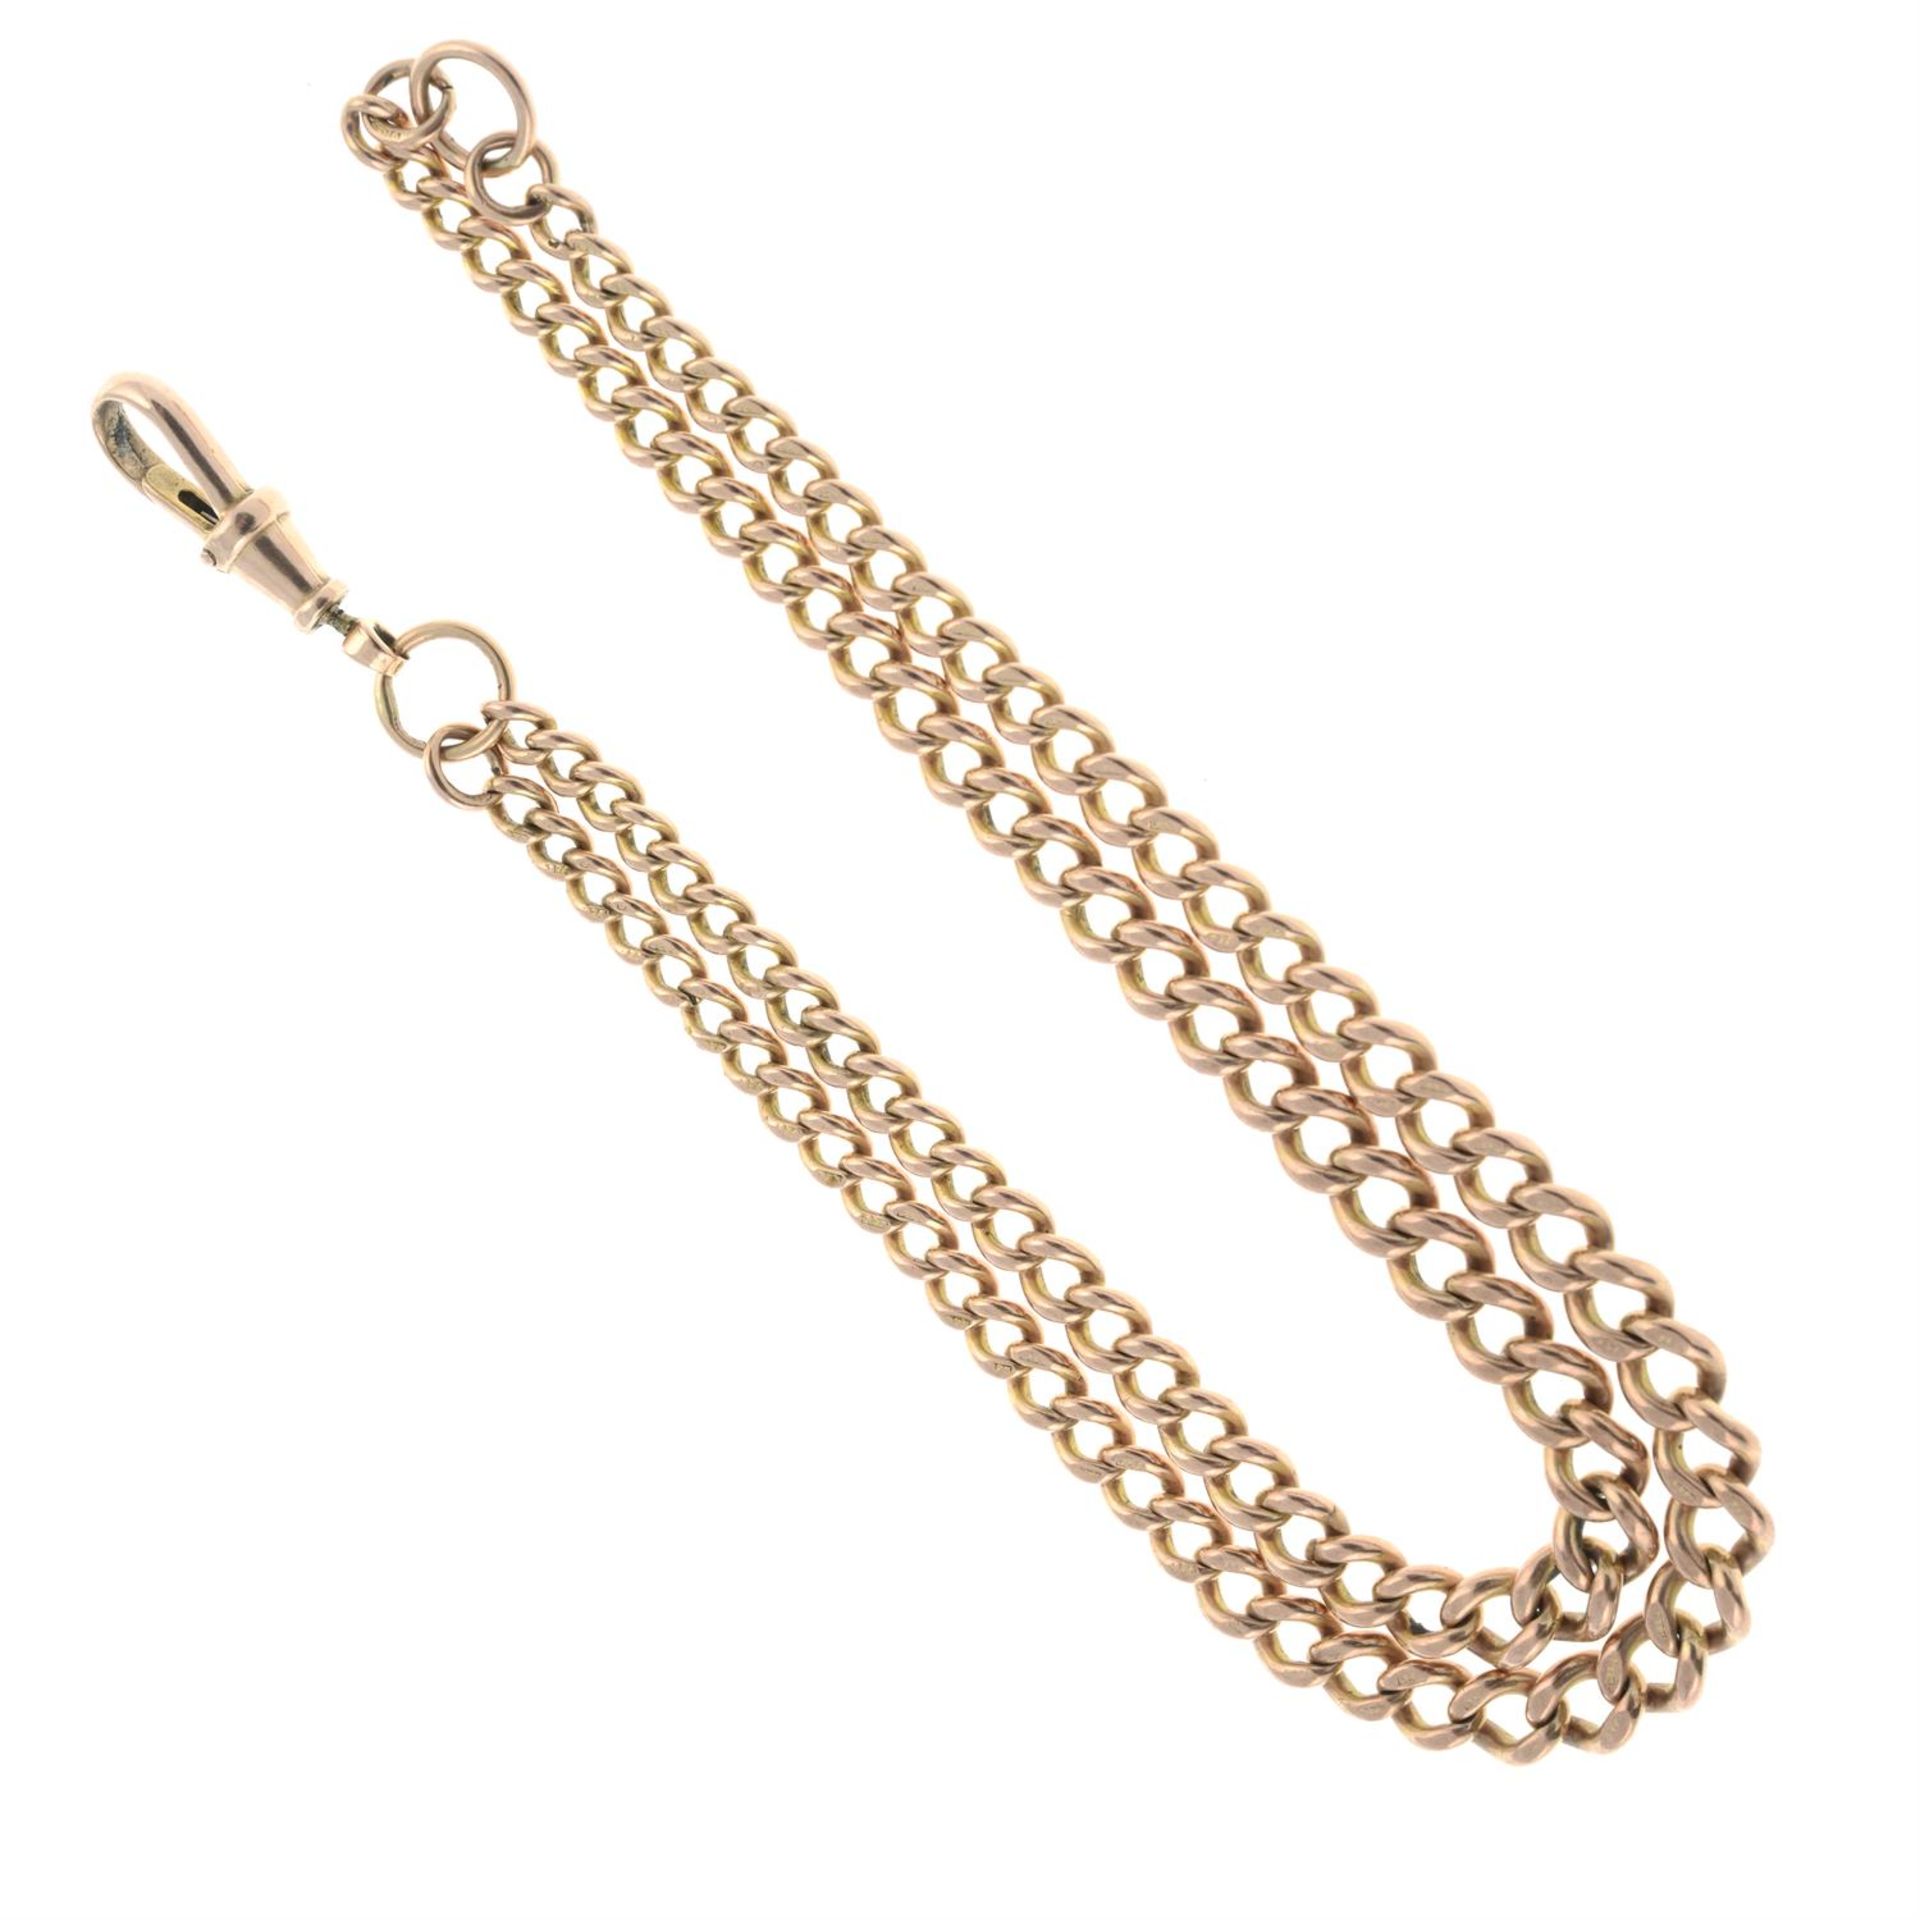 An early 20th century 9ct gold curb-link chain bracelet.